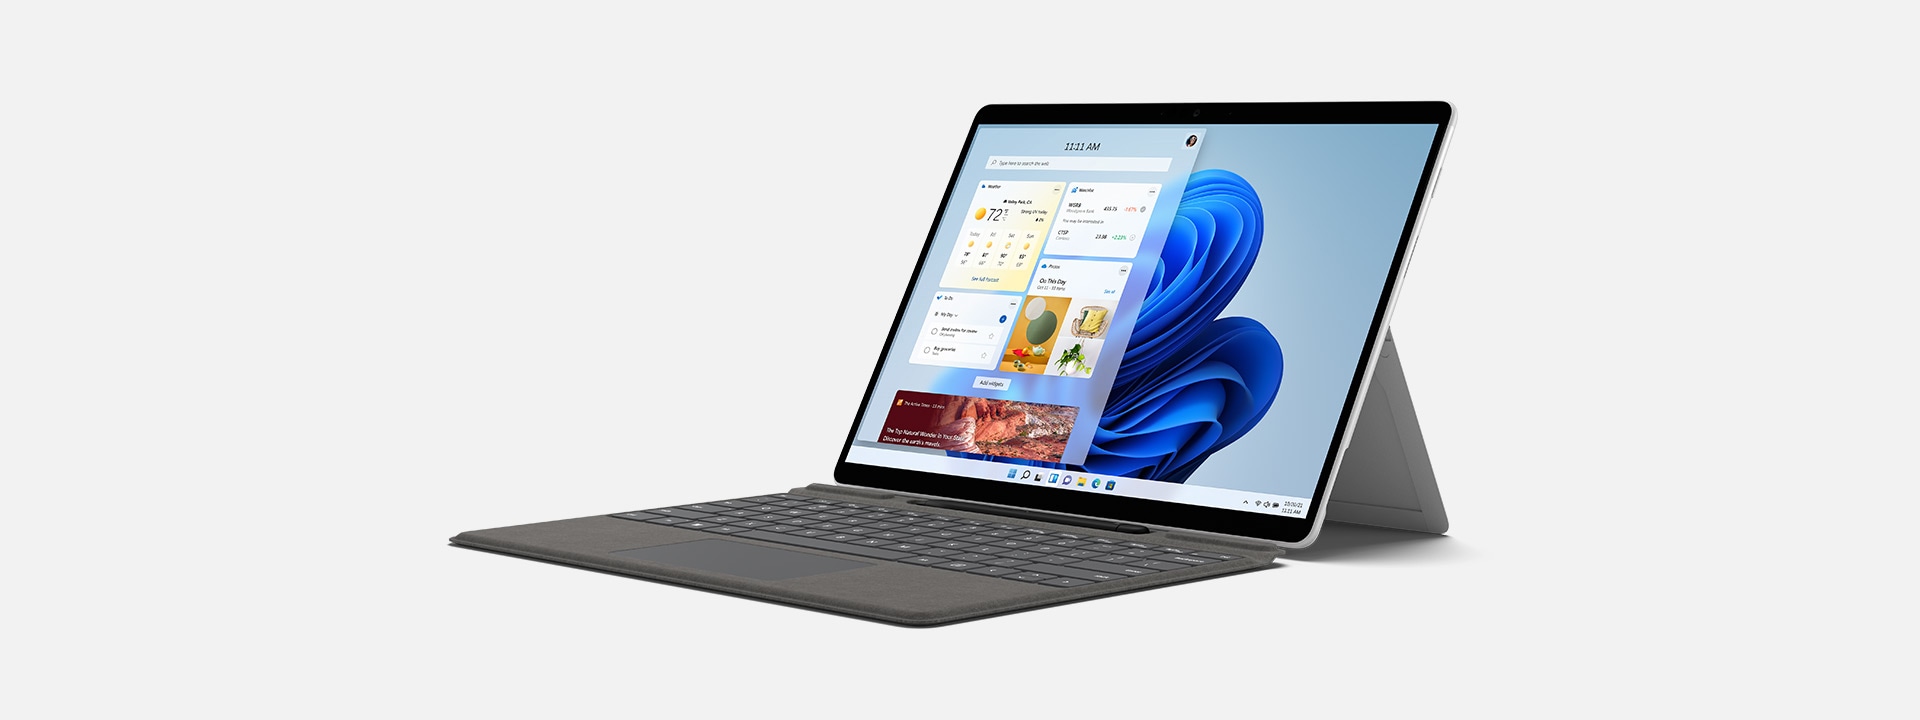 Surface Pro X shown as a laptop with Windows 11 homescreen.